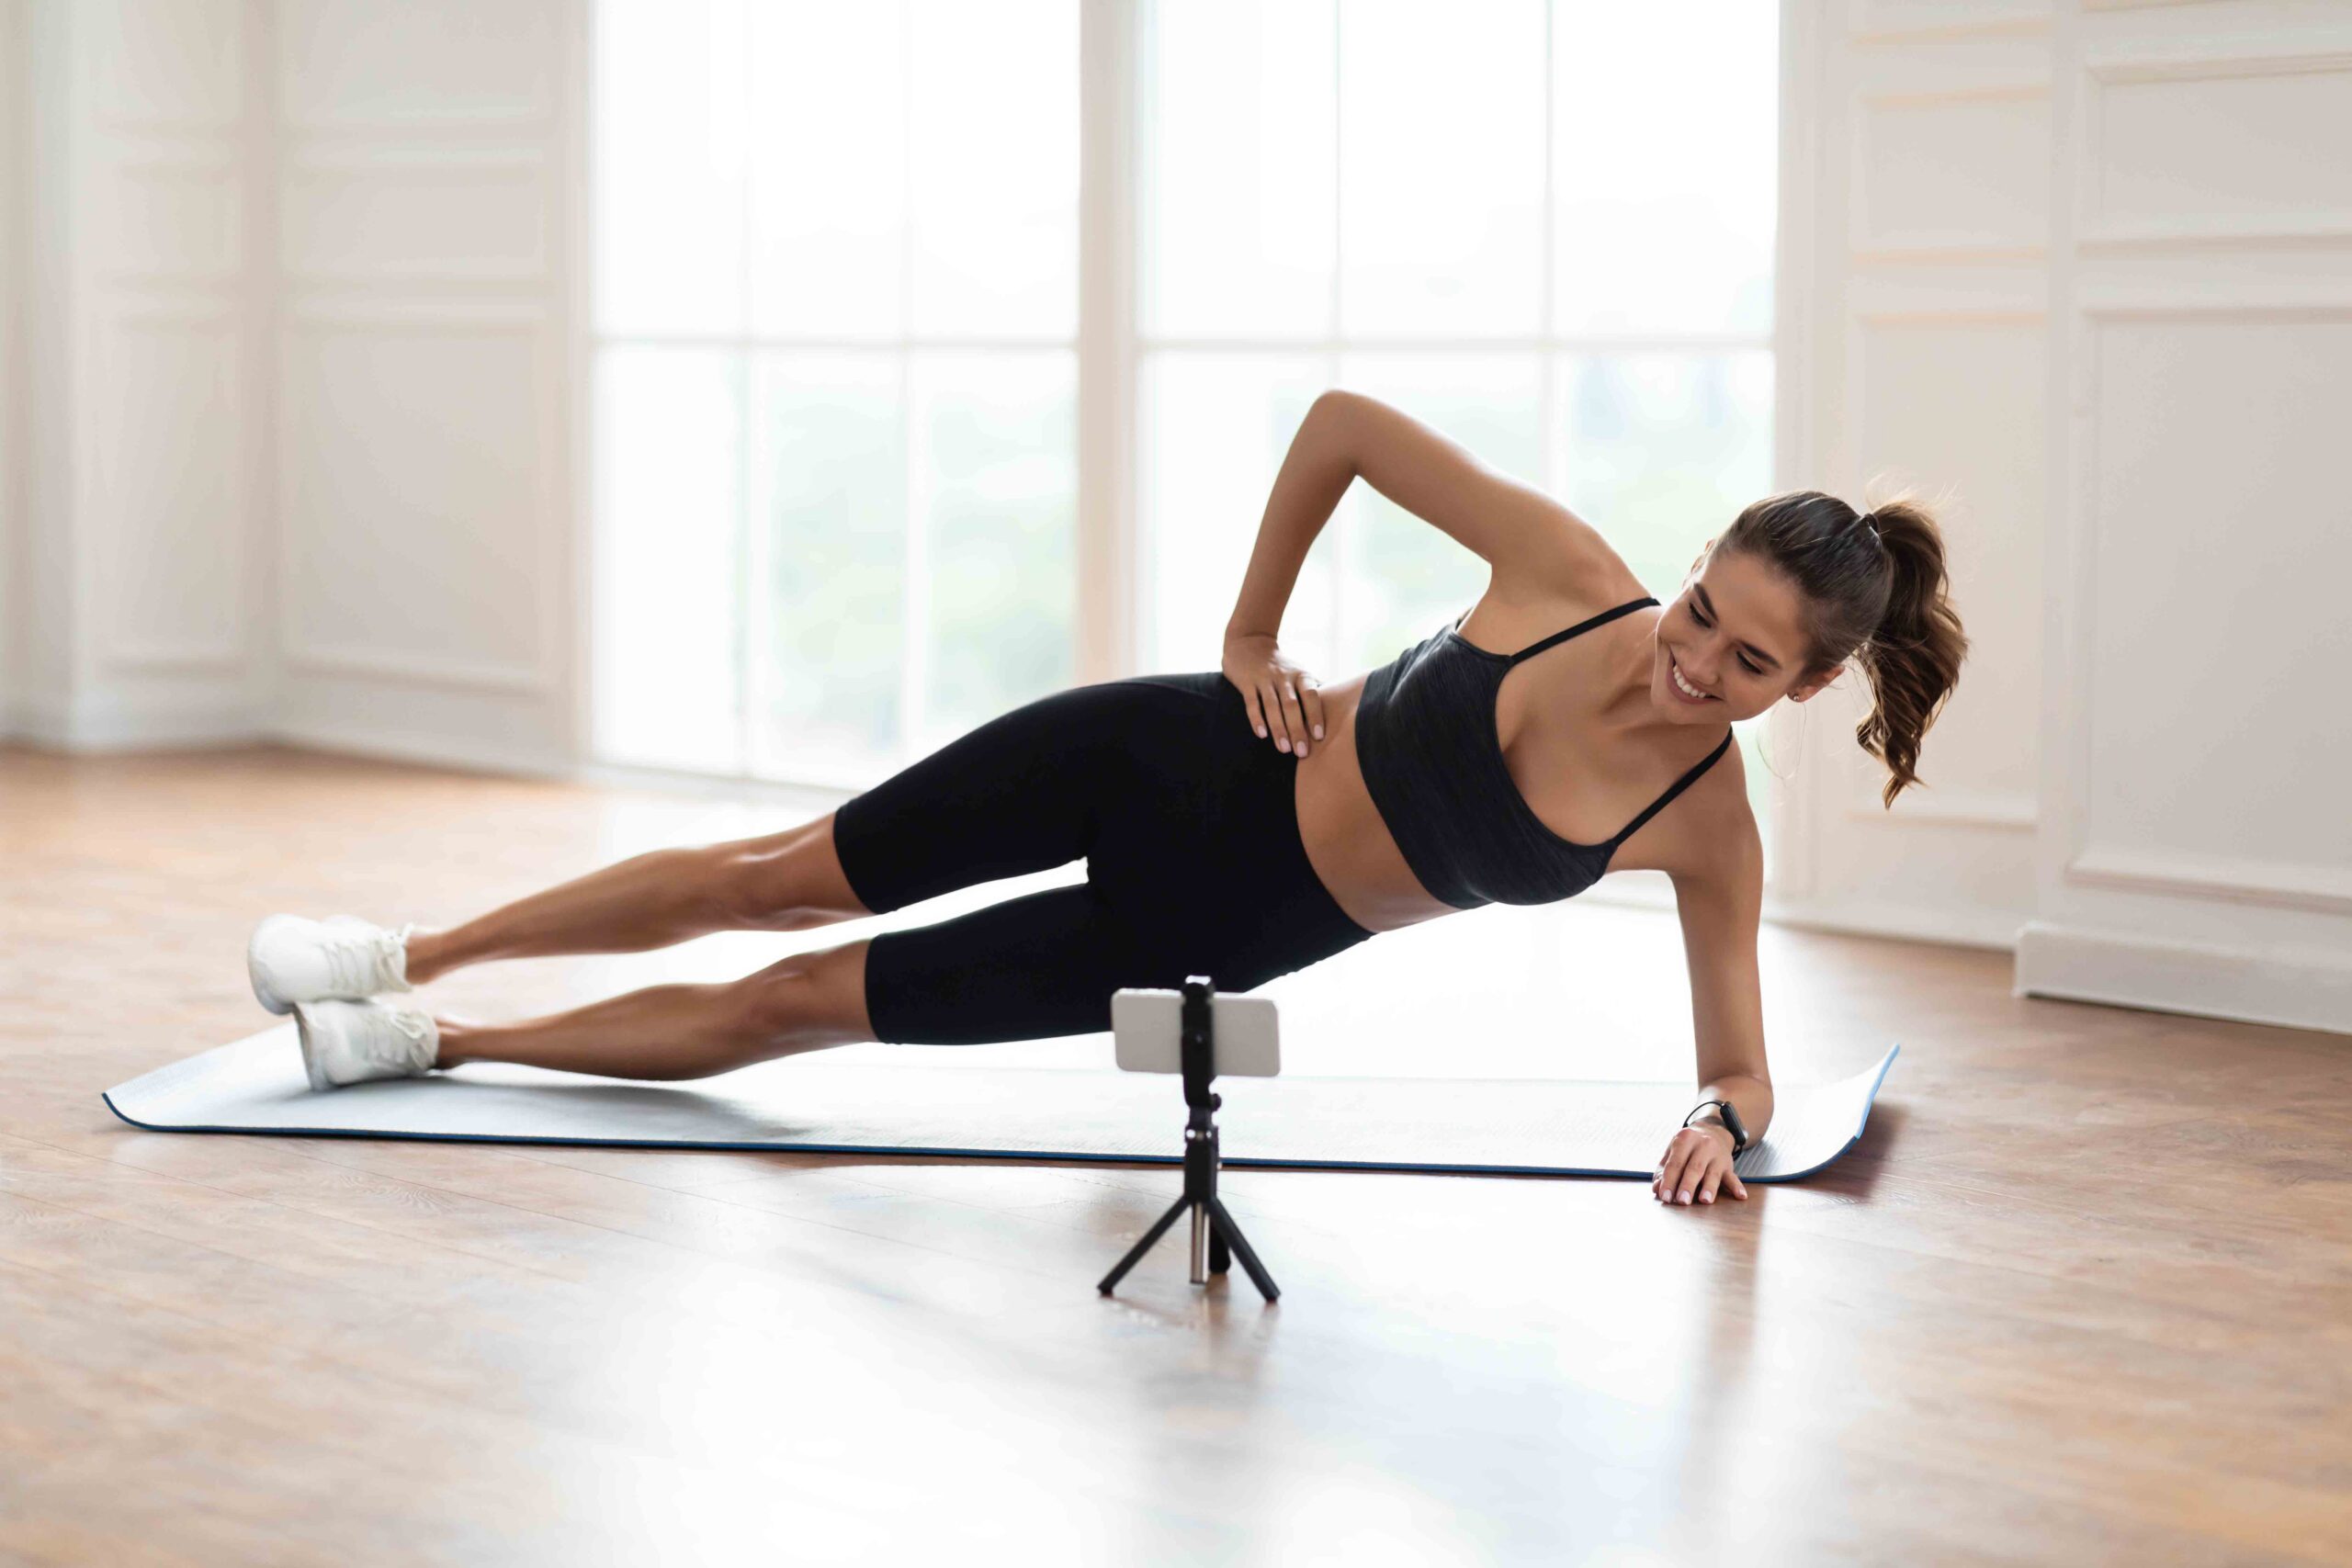 Online Workout. Smiling Sporty Female Standing In Side Plank Position On Yoga Mat Near Window, Looking At Cellphone On Tripod, Watching Tutorial Or Recording Video For Blog, Having Chat With Coach